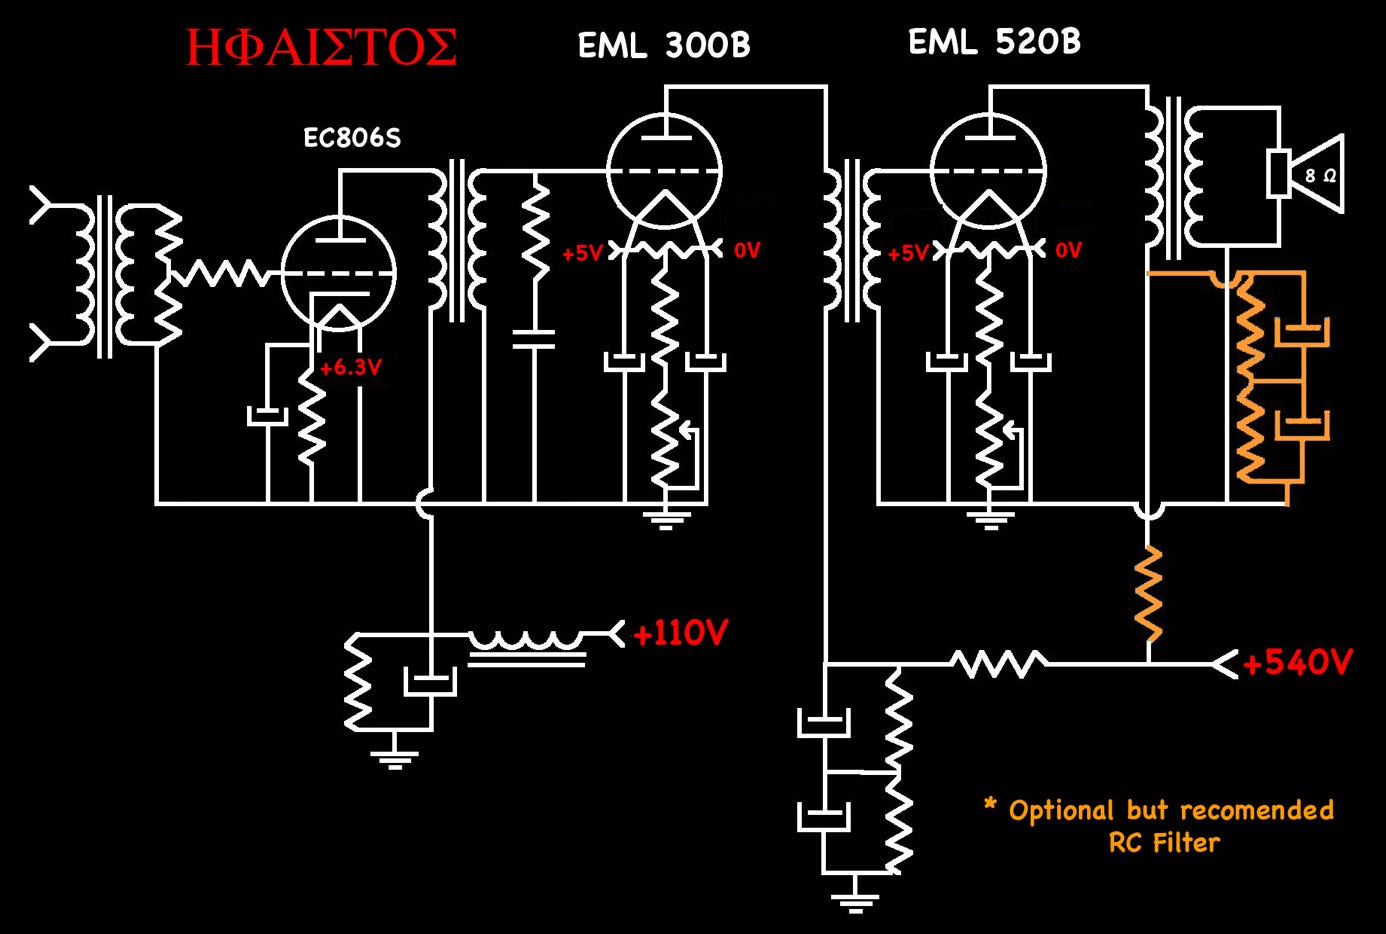 Schematic of the The Flagship of M-Amps. WE417A - EML 300B XLS - EML 520 XLS.